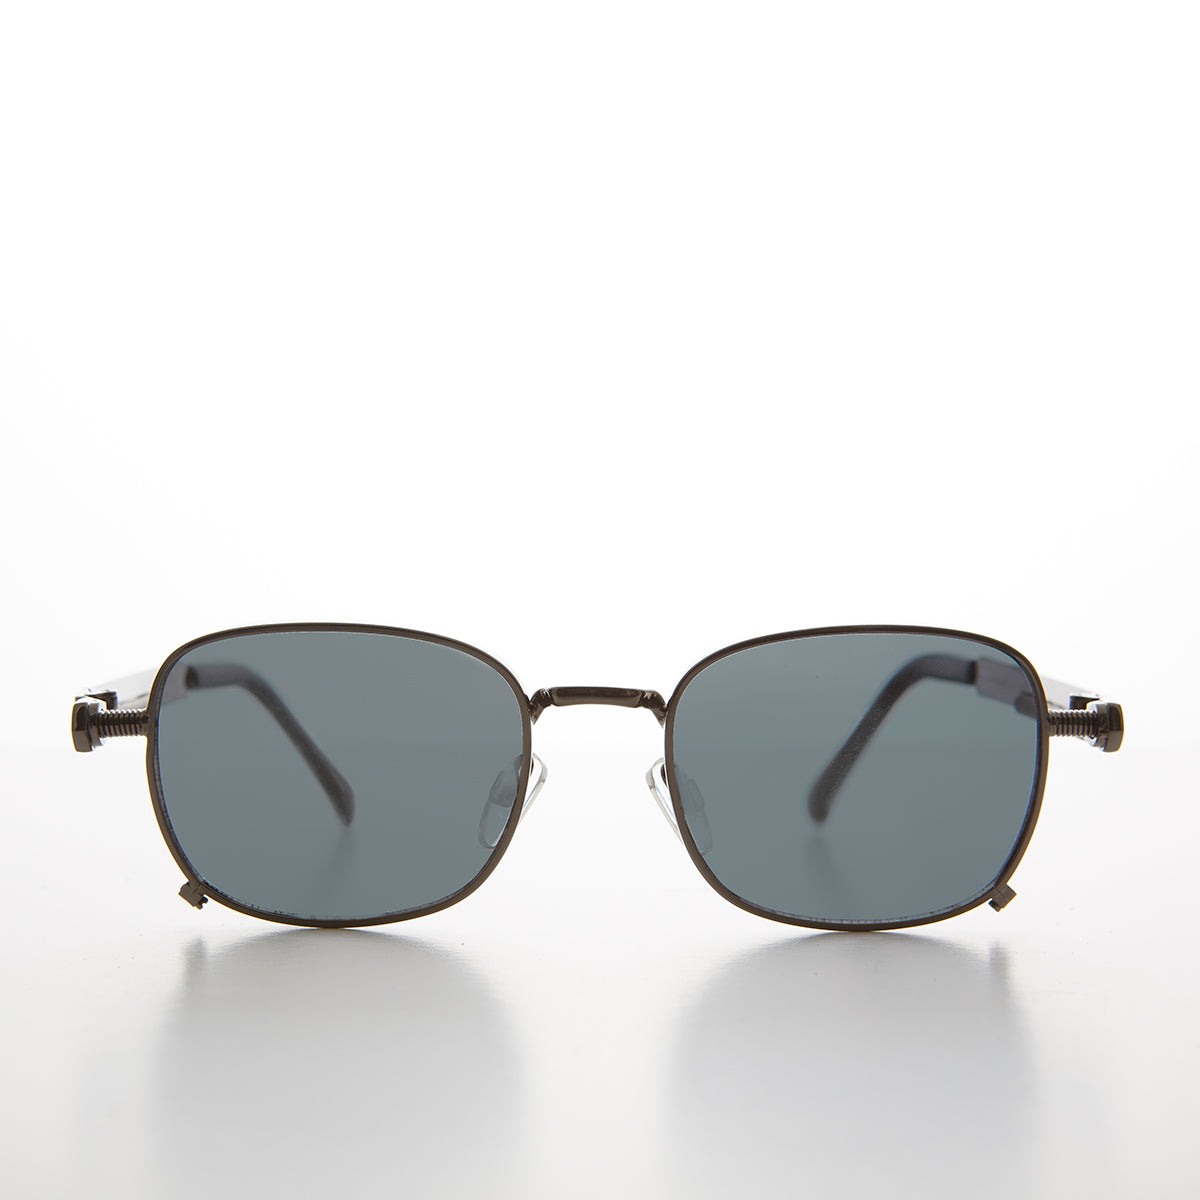 Tailored Steampunk Sunglass with Industrial Temples - Tyga 2